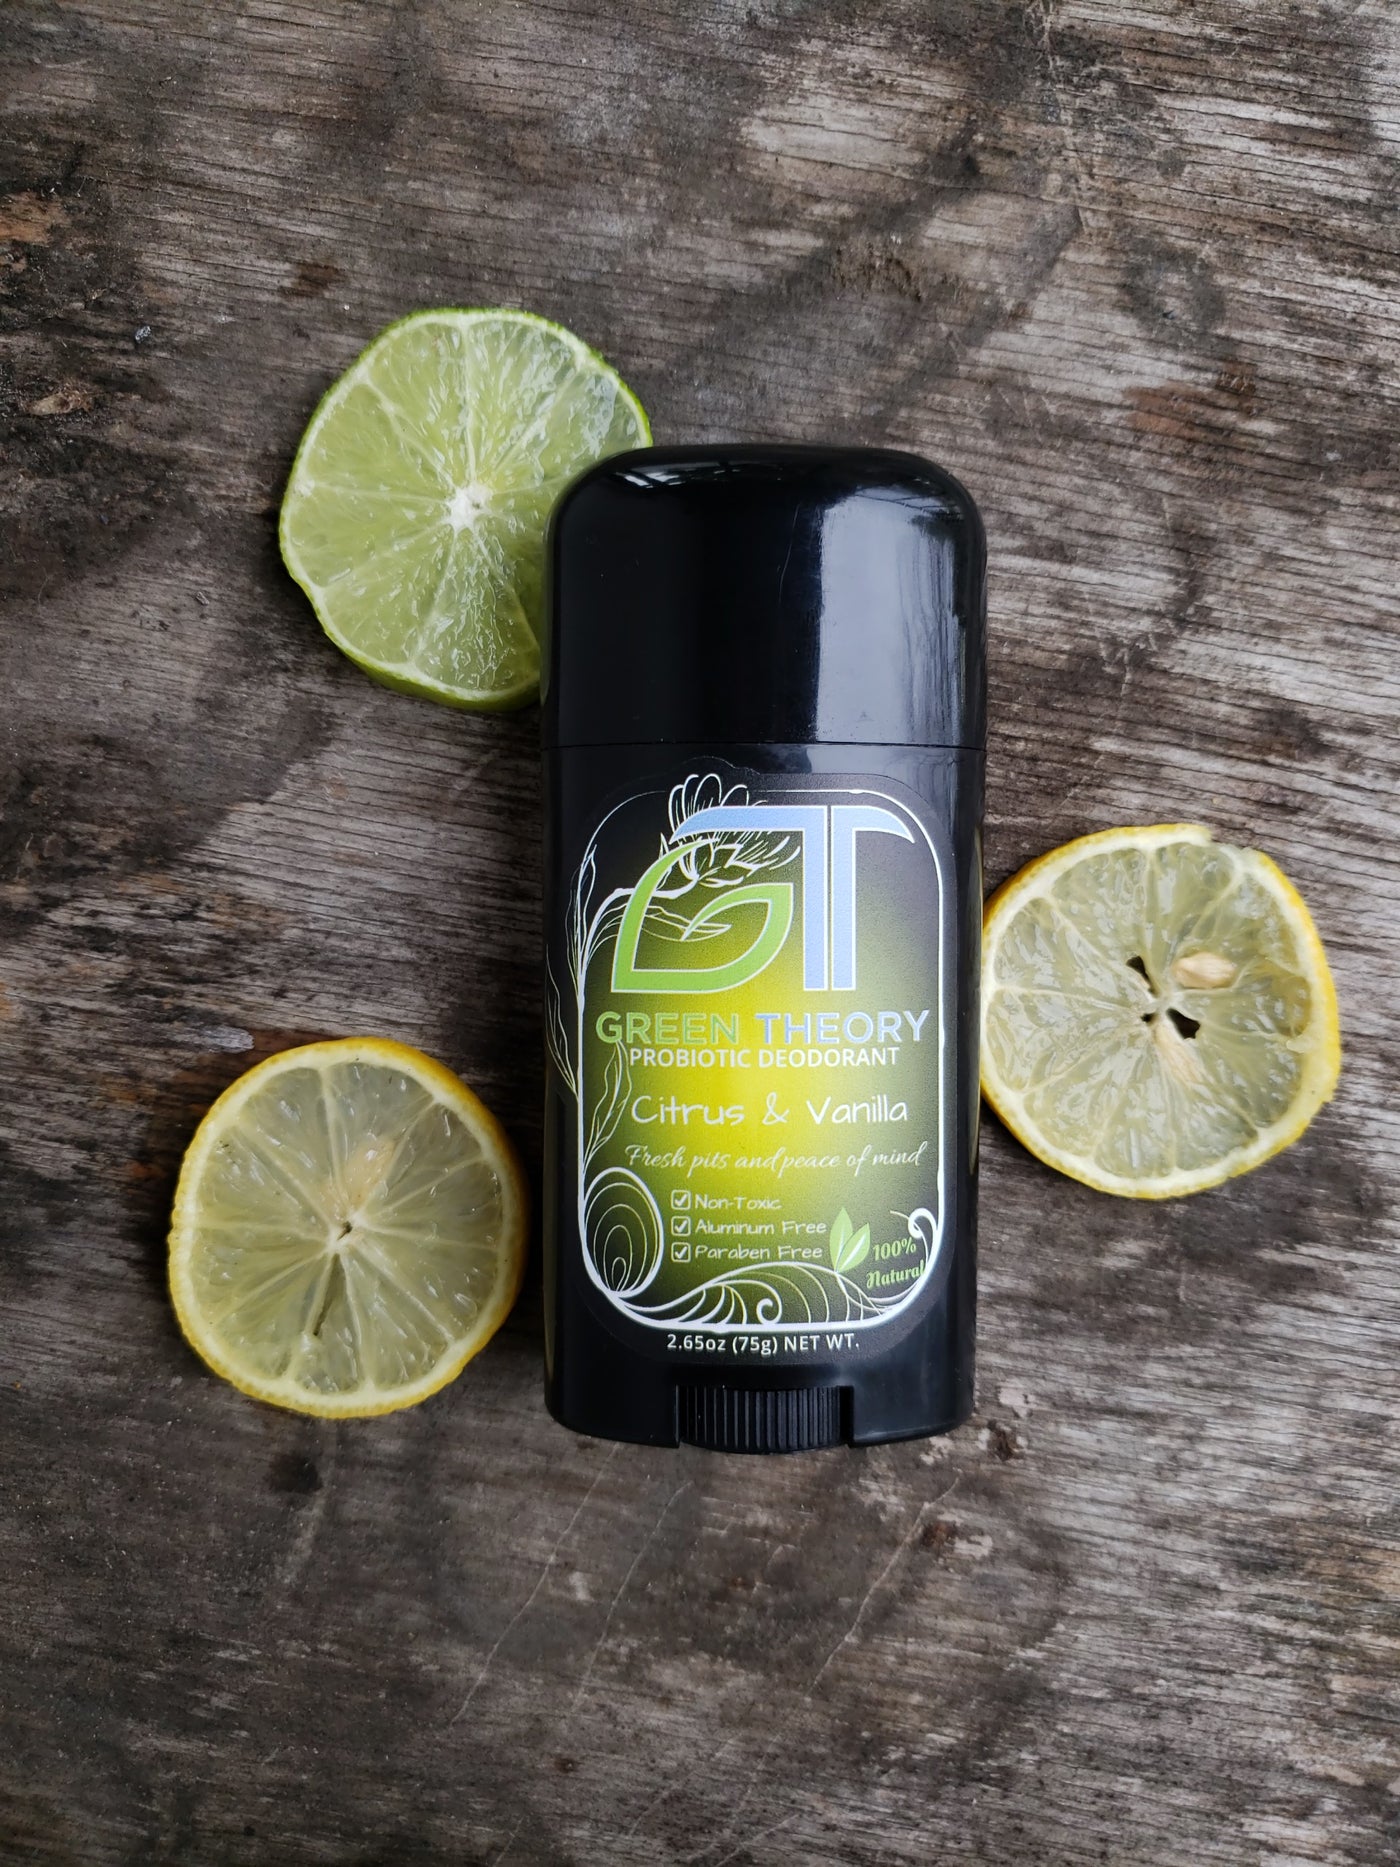 photo of green theory citrus and vanilla probiotic natural deodorant laying on a wood grain background with slices of lemon and lime around it